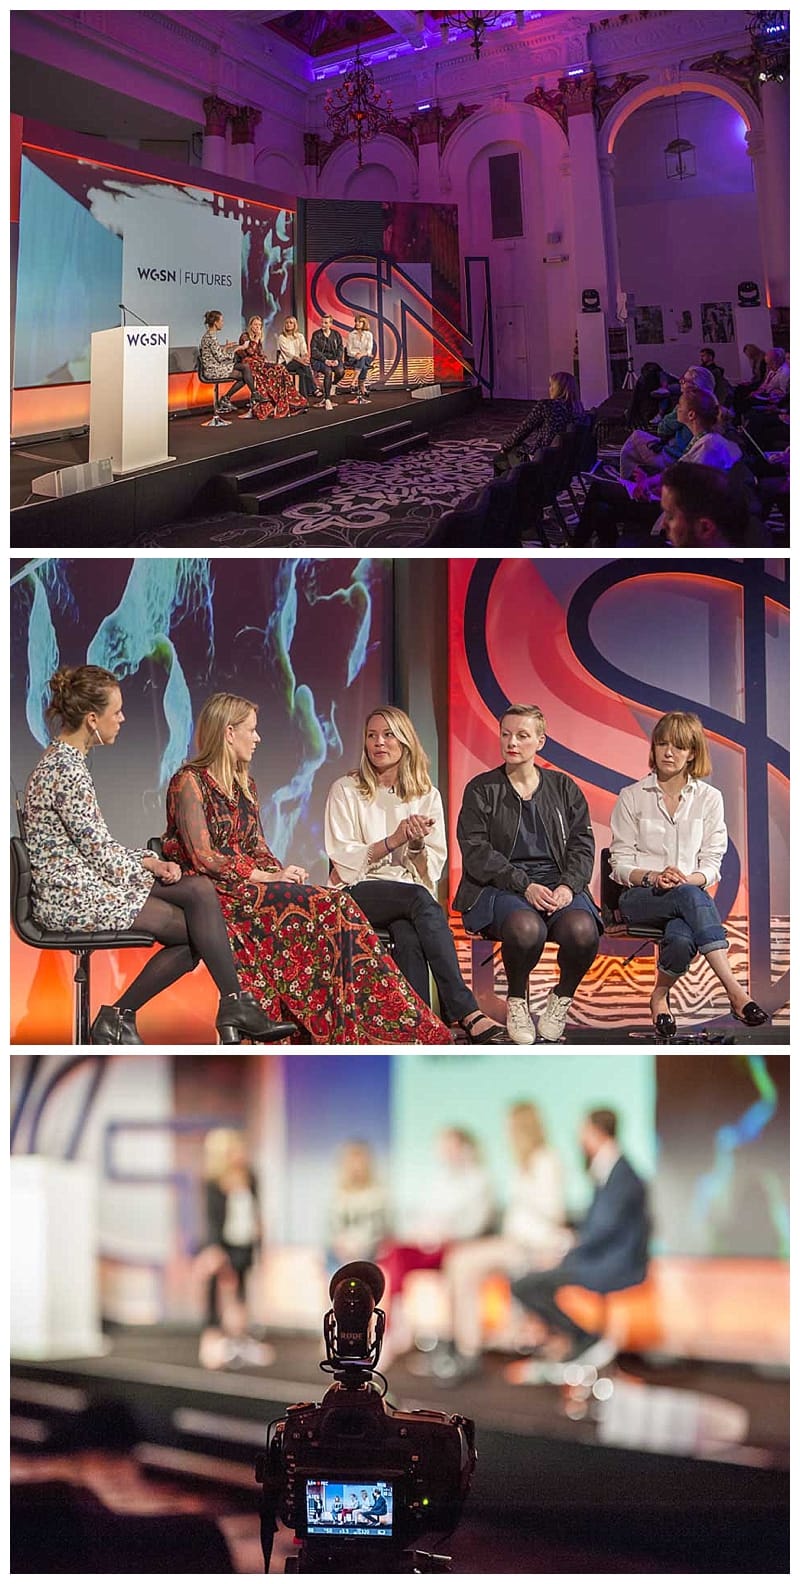 wgsn-conference-benjamin-wetherall-photography-0004